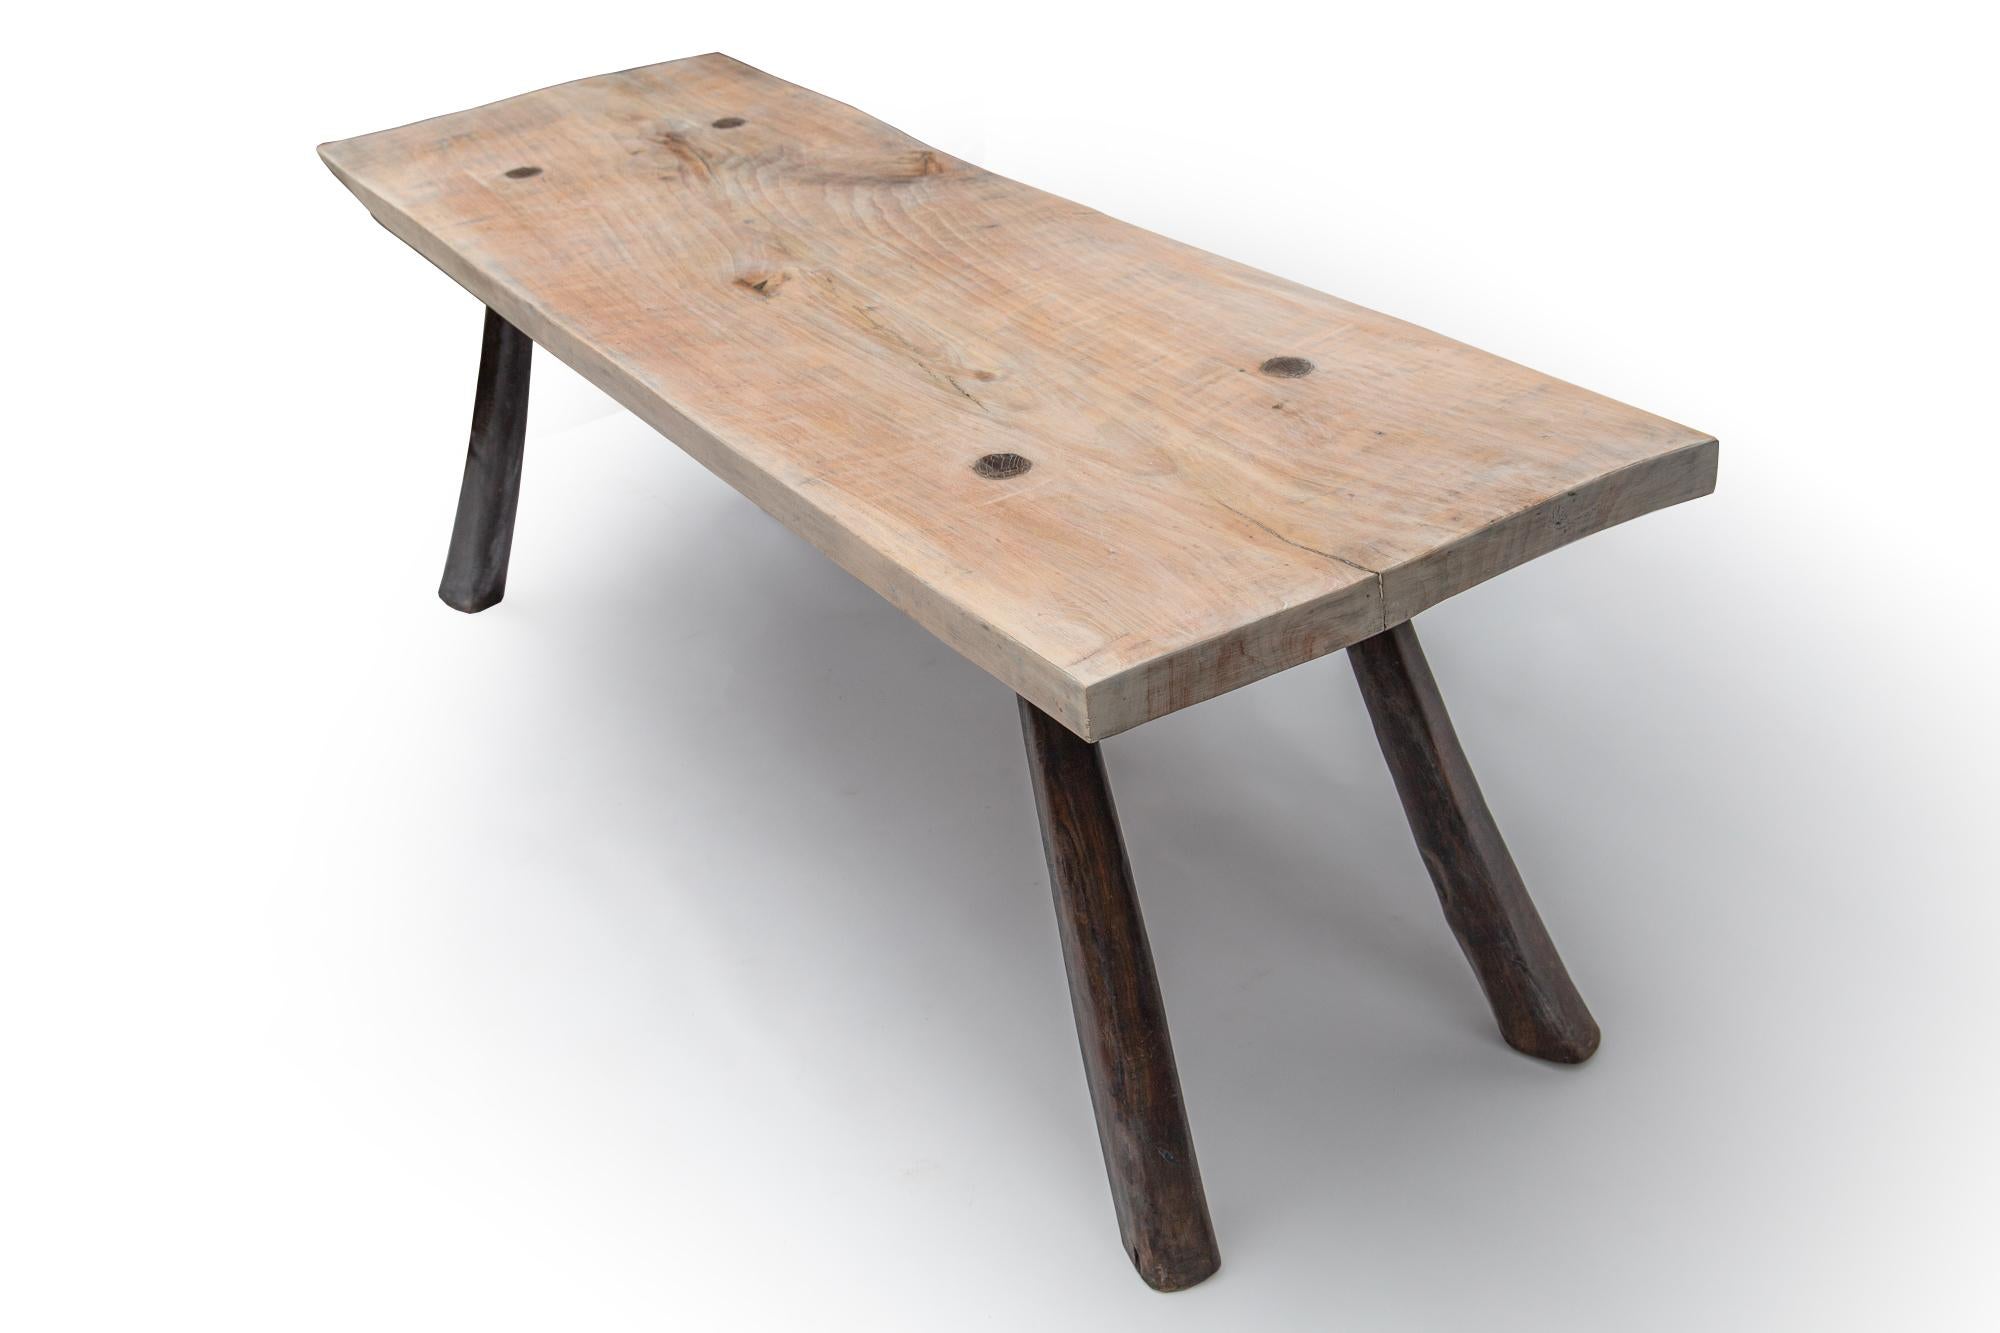 Minimalist Olive Wood Constructivist Table from the Balearics, early 20th C